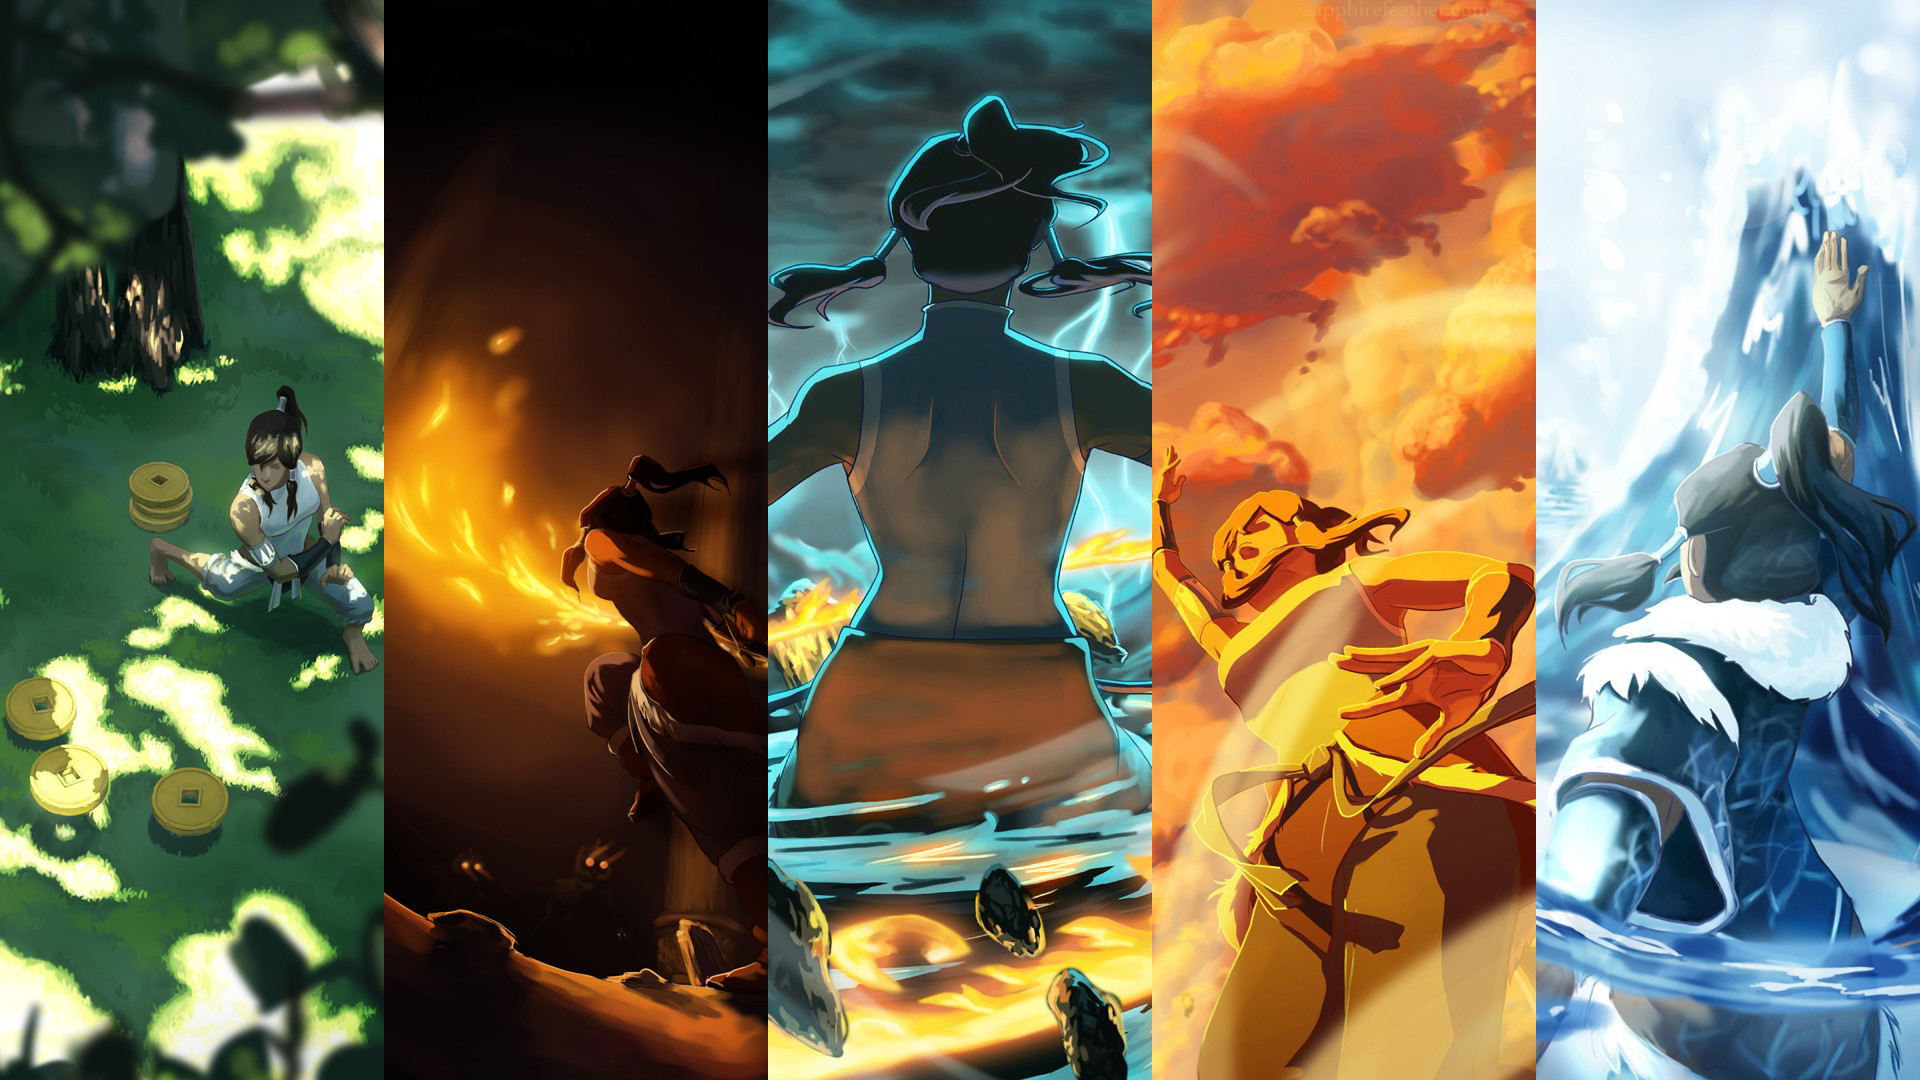 1920x1080 Avatar The Last Airbender Panels Collage.